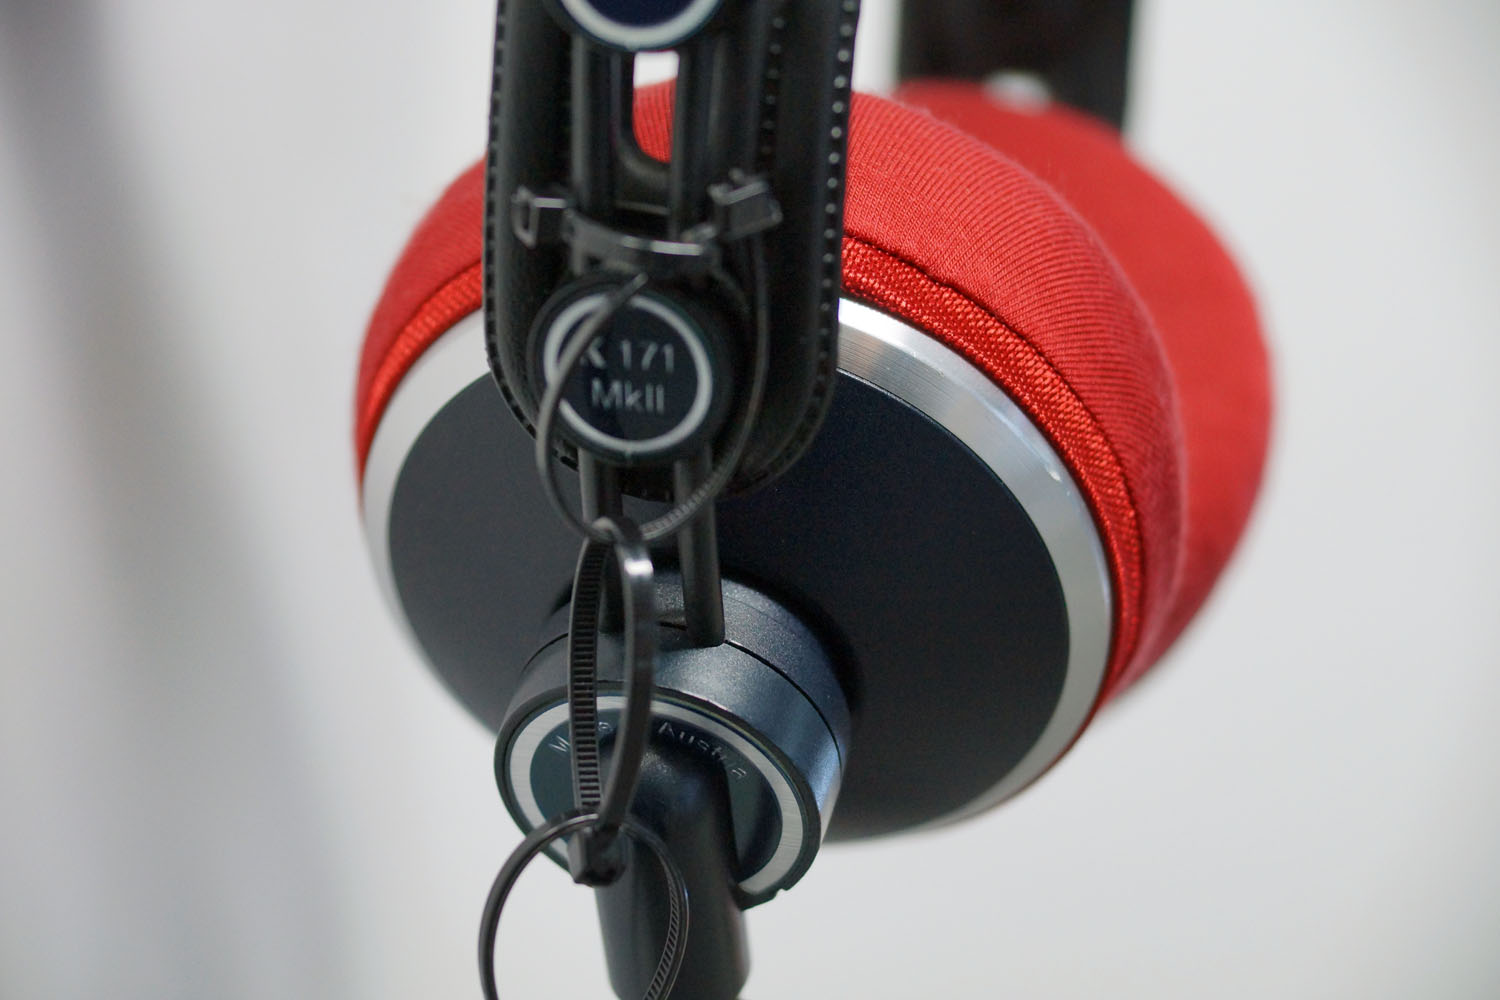 AKG K171 MKII earpad repair and protection: Super Stretch 